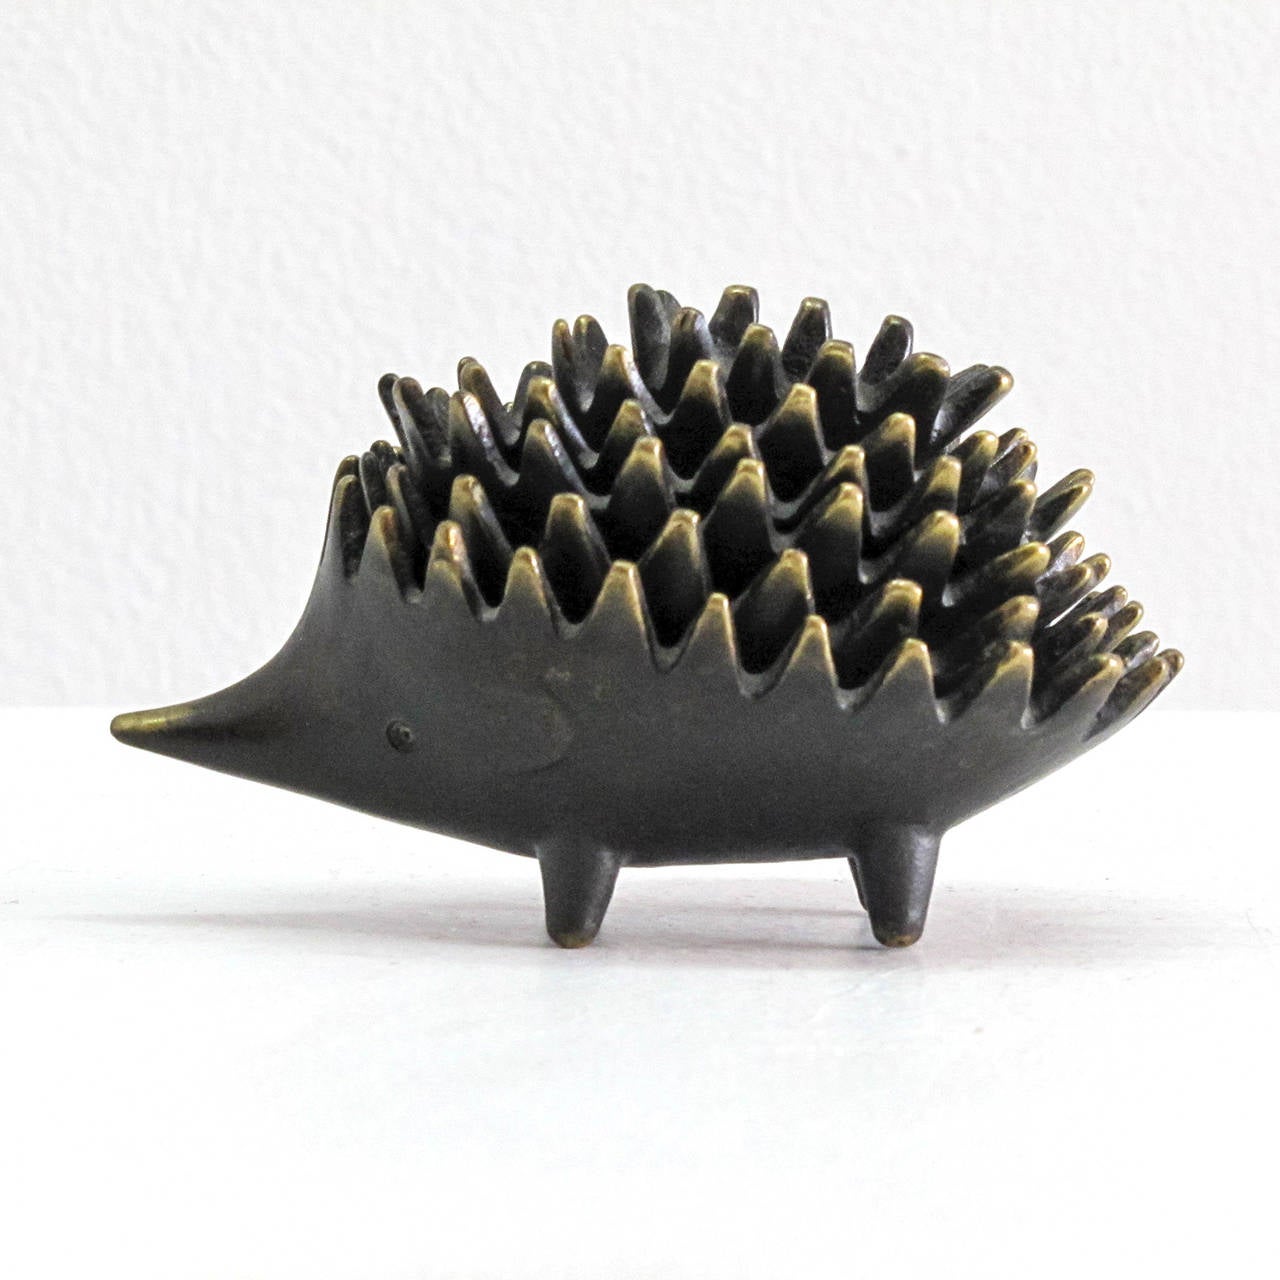 Patinated Hedgehog Ashtrays by Walter Bosse for Hertha Baller of Austria